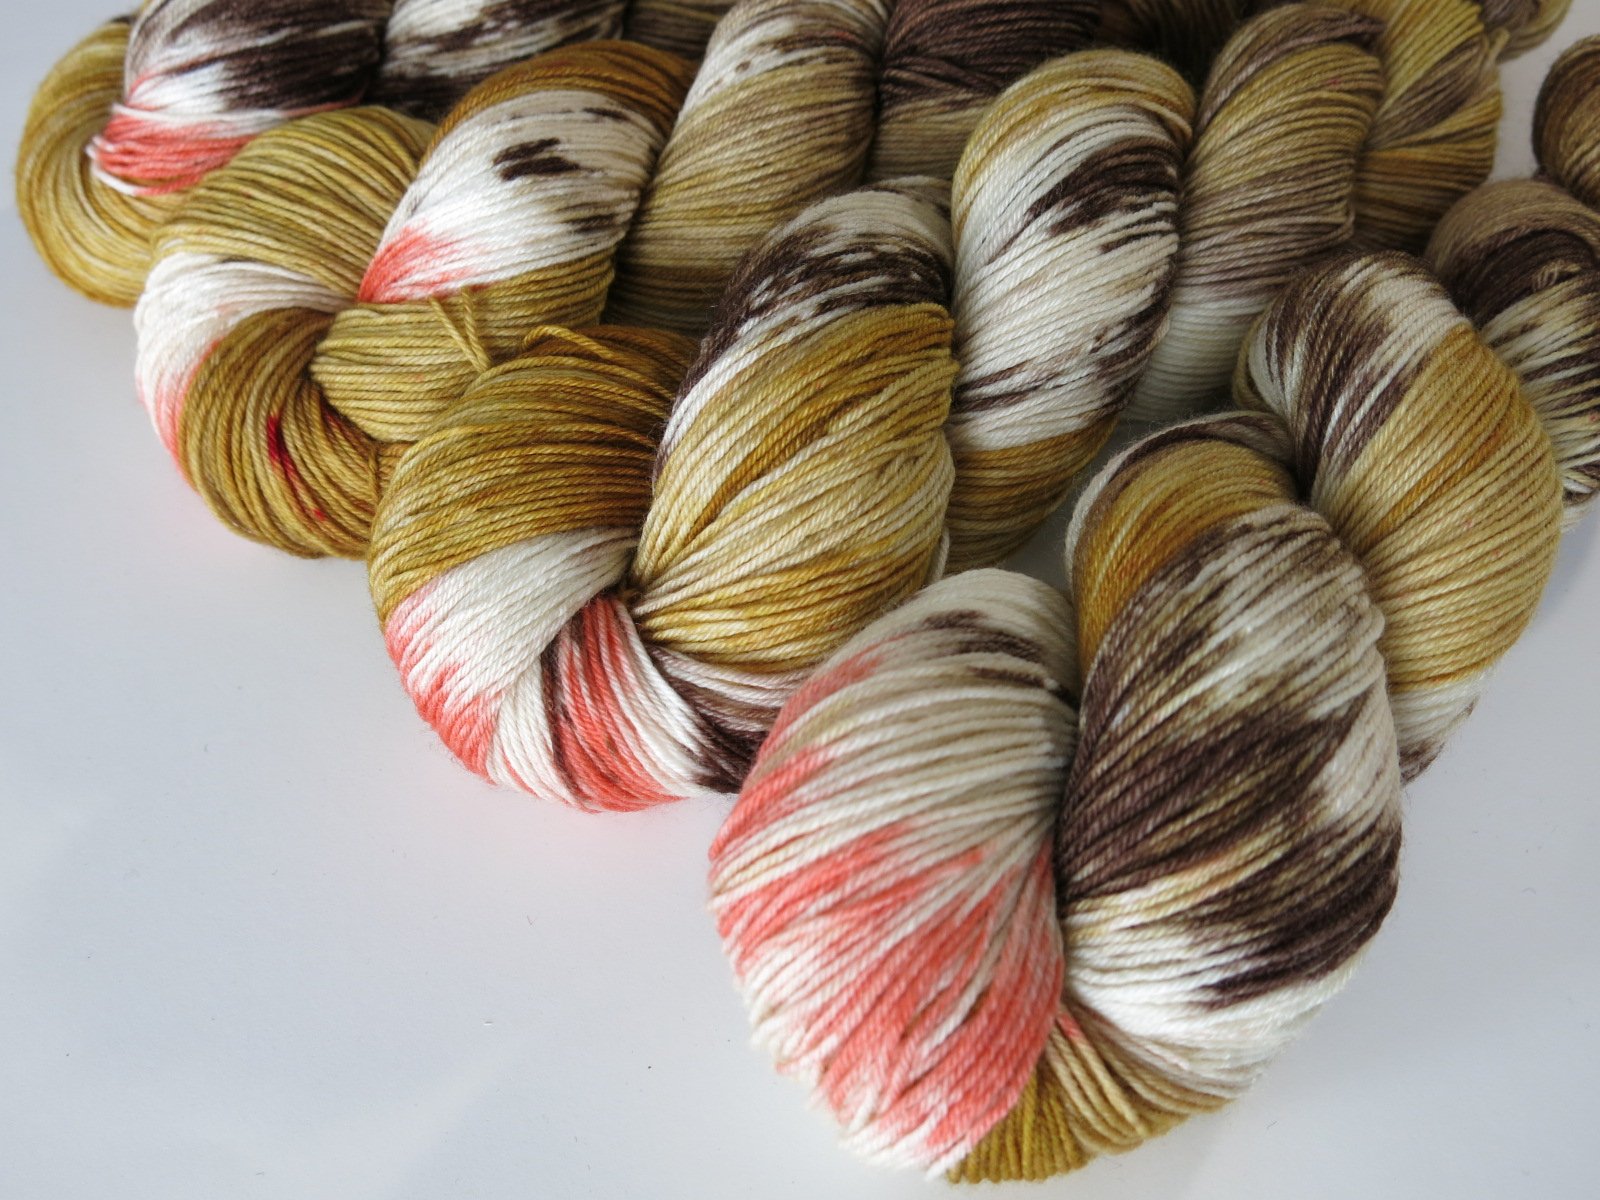 hand dyed yarn skeins in tan and brown with a pop of coral